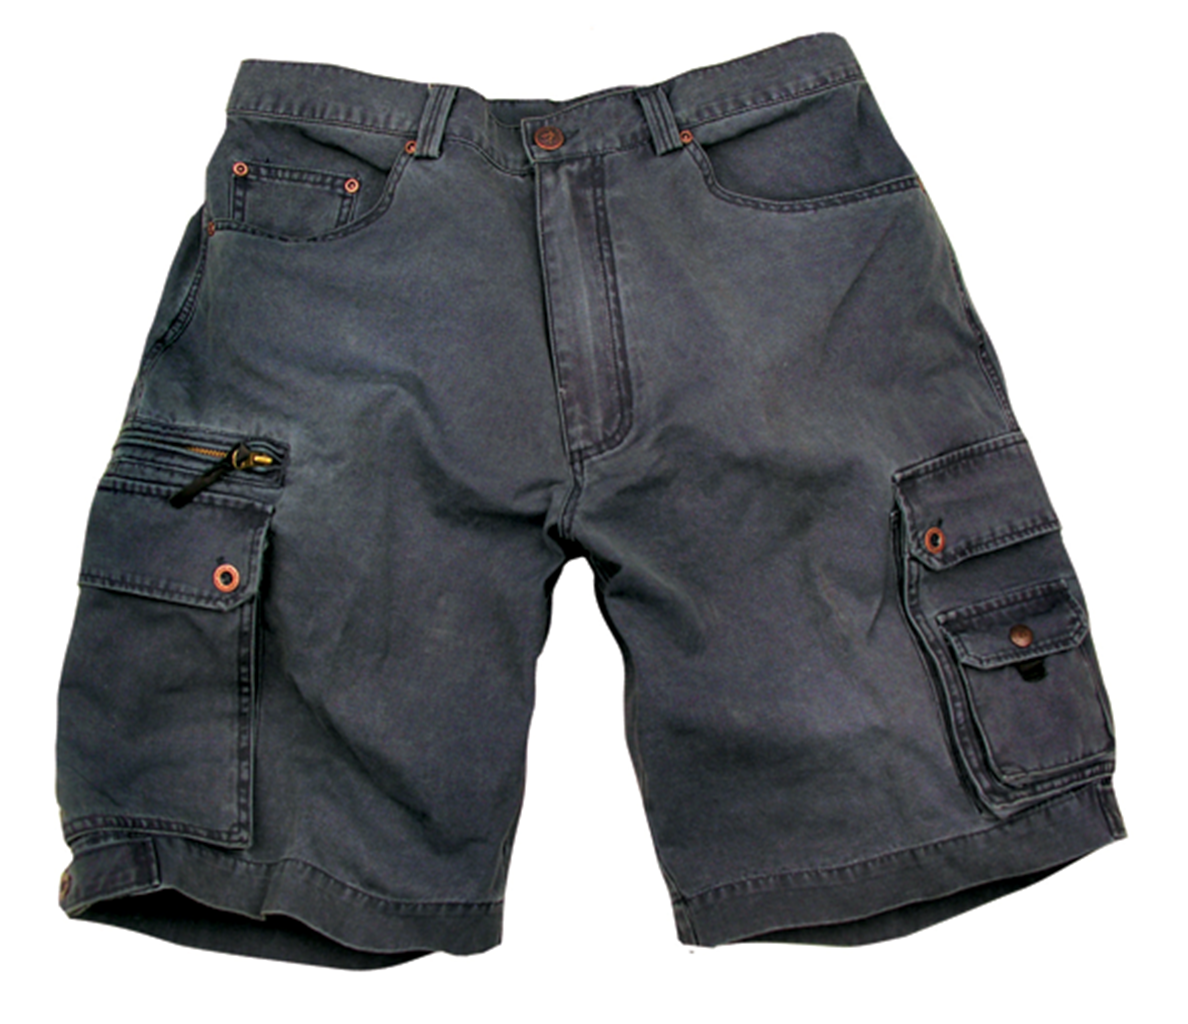 Outdoor | Leisure | Cargo shorts- short pants robust with many pockets